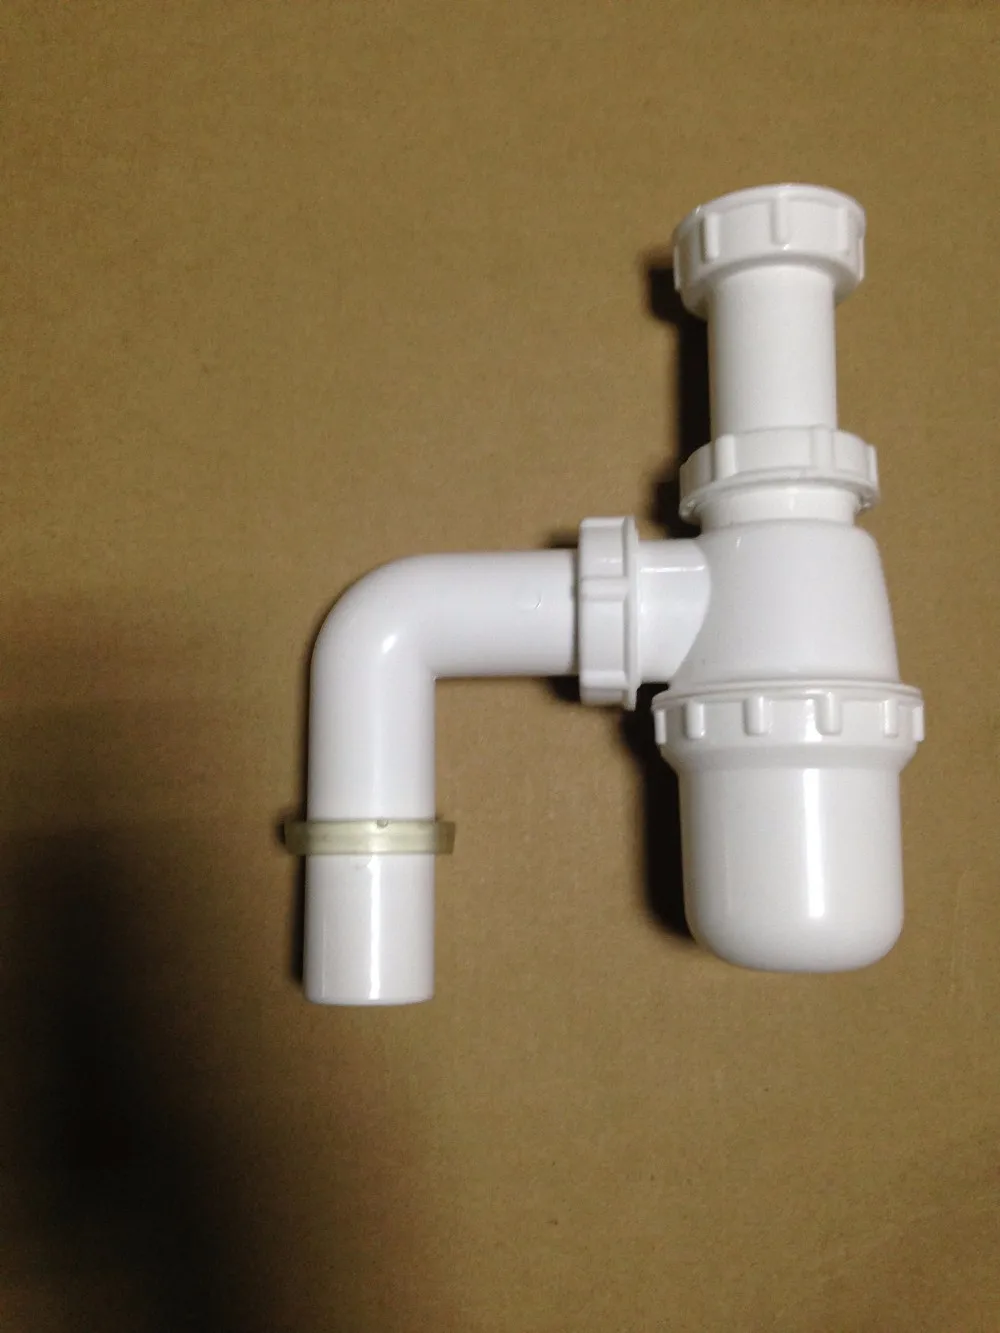 32mm Plastic Siphon For Kitchen Sink - Buy Siphon For Kitchen Sink